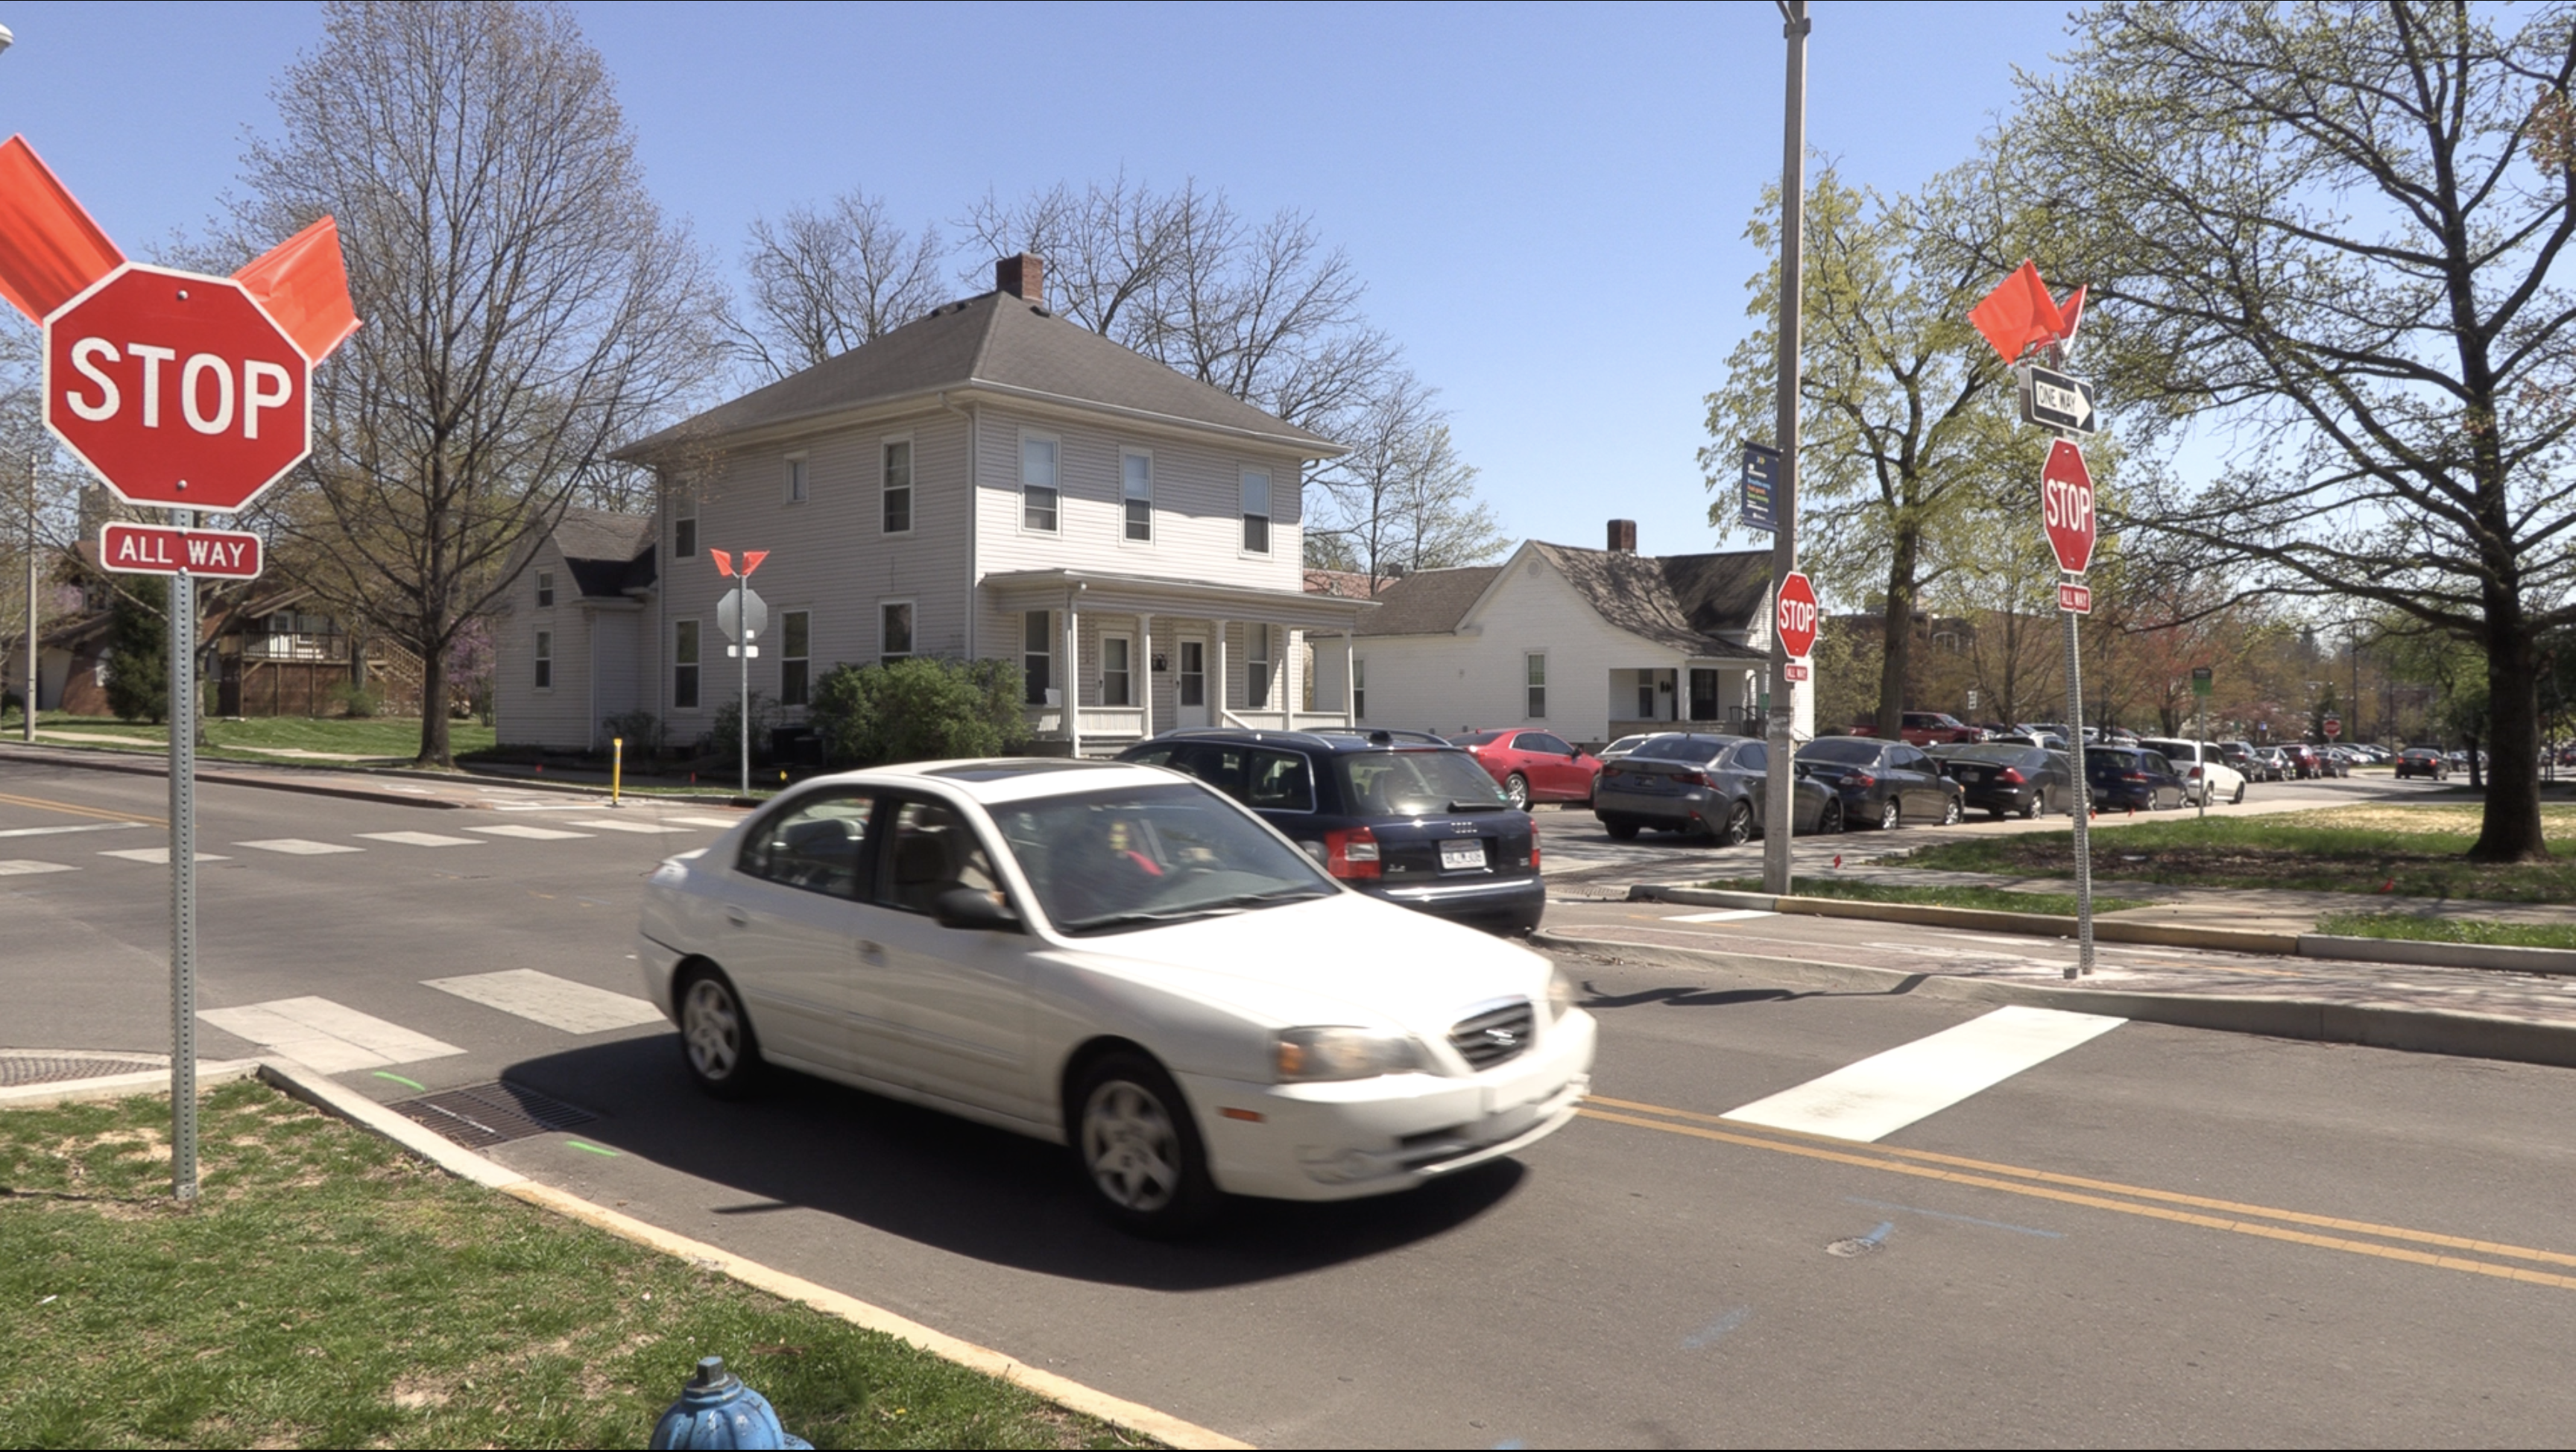 7th & Dunn Street intersection converted to all-way stop